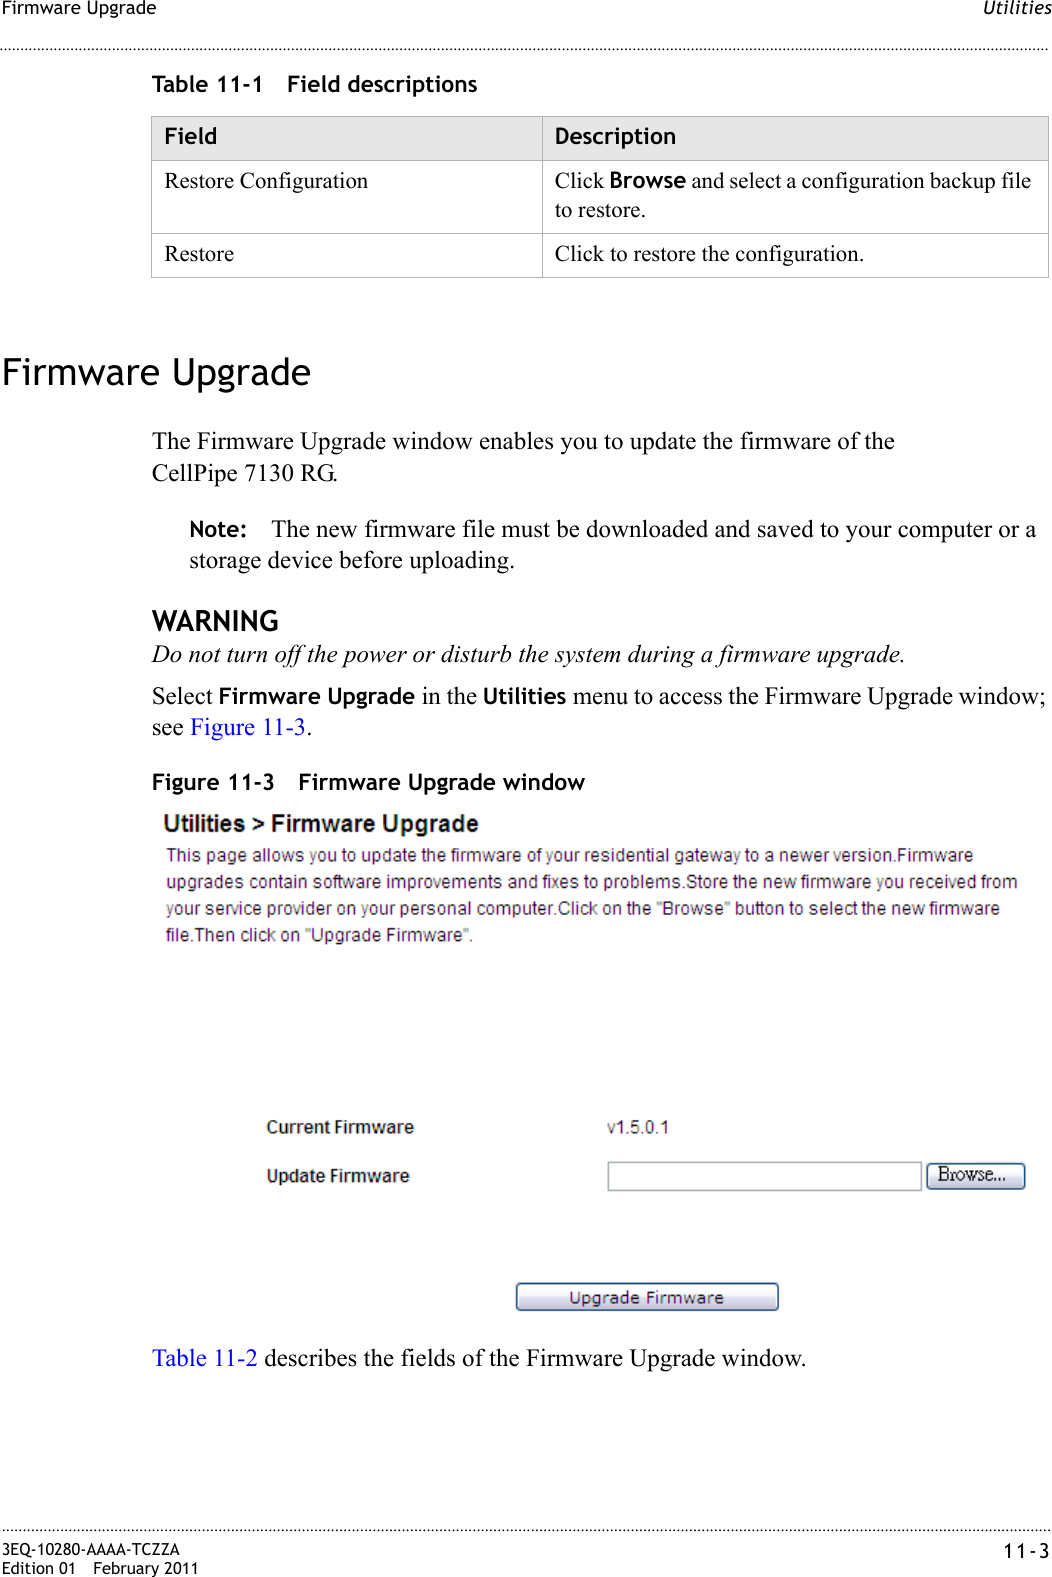 UtilitiesFirmware Upgrade............................................................................................................................................................................................................................................................3EQ-10280-AAAA-TCZZAEdition 01 February 2011 11-3............................................................................................................................................................................................................................................................Table 11-1 Field descriptionsFirmware UpgradeThe Firmware Upgrade window enables you to update the firmware of the CellPipe 7130 RG. Note: The new firmware file must be downloaded and saved to your computer or a storage device before uploading.WARNINGDo not turn off the power or disturb the system during a firmware upgrade.Select Firmware Upgrade in the Utilities menu to access the Firmware Upgrade window; see Figure 11-3.Figure 11-3 Firmware Upgrade windowTable 11-2 describes the fields of the Firmware Upgrade window.Field DescriptionRestore Configuration Click Browse and select a configuration backup file to restore.Restore Click to restore the configuration.